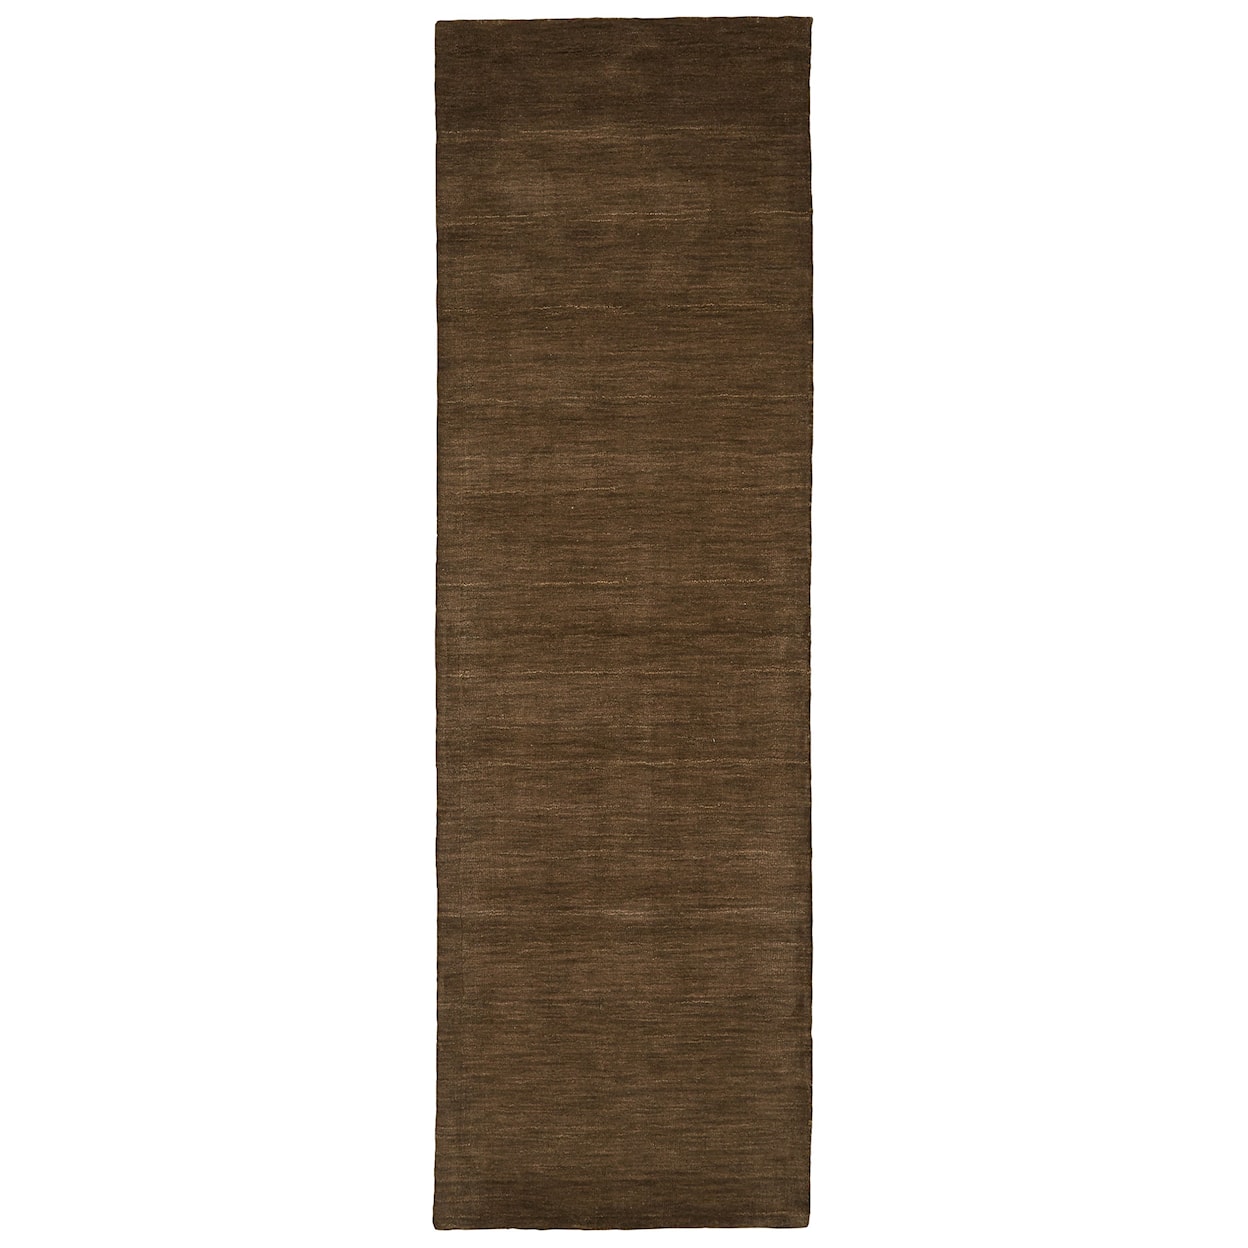 Feizy Rugs Luna Brown 2' x 3' Area Rug